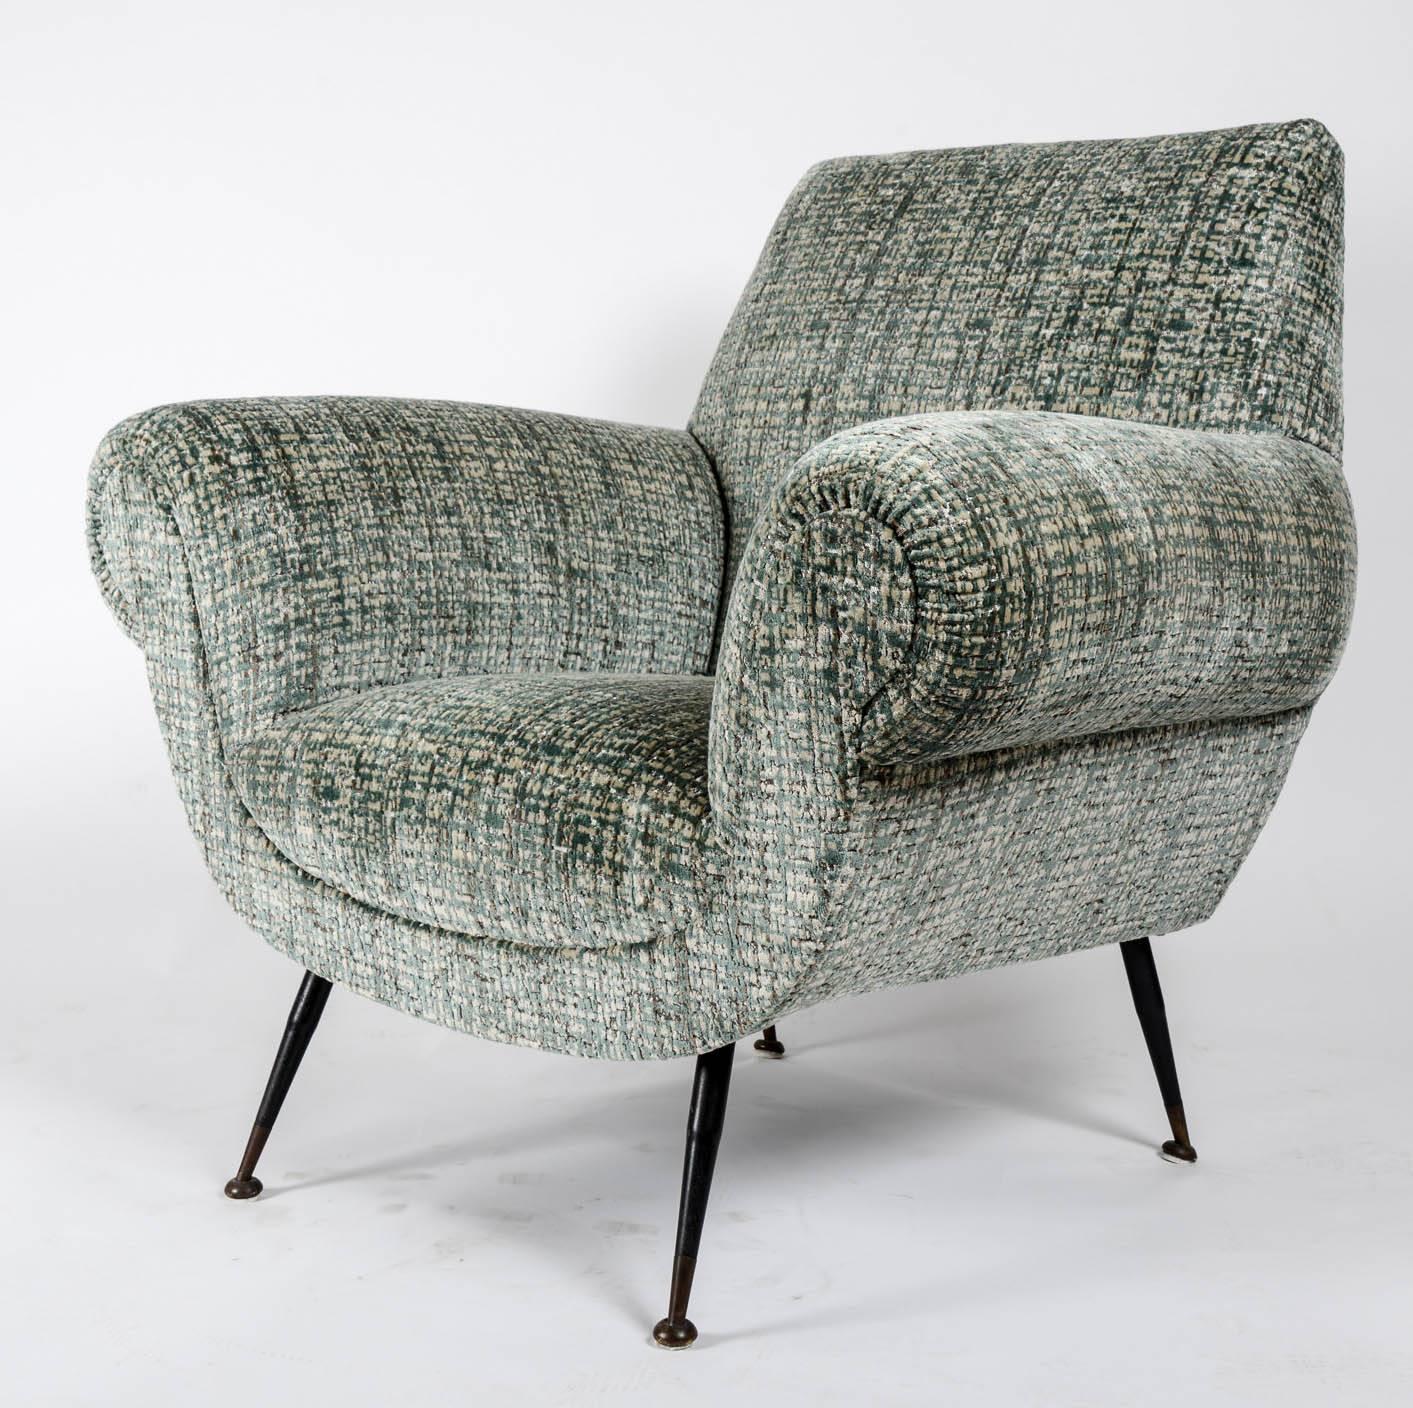 Pair of vintage armchairs by Gigi Radice, newly upholstered with Nobilis fabric.